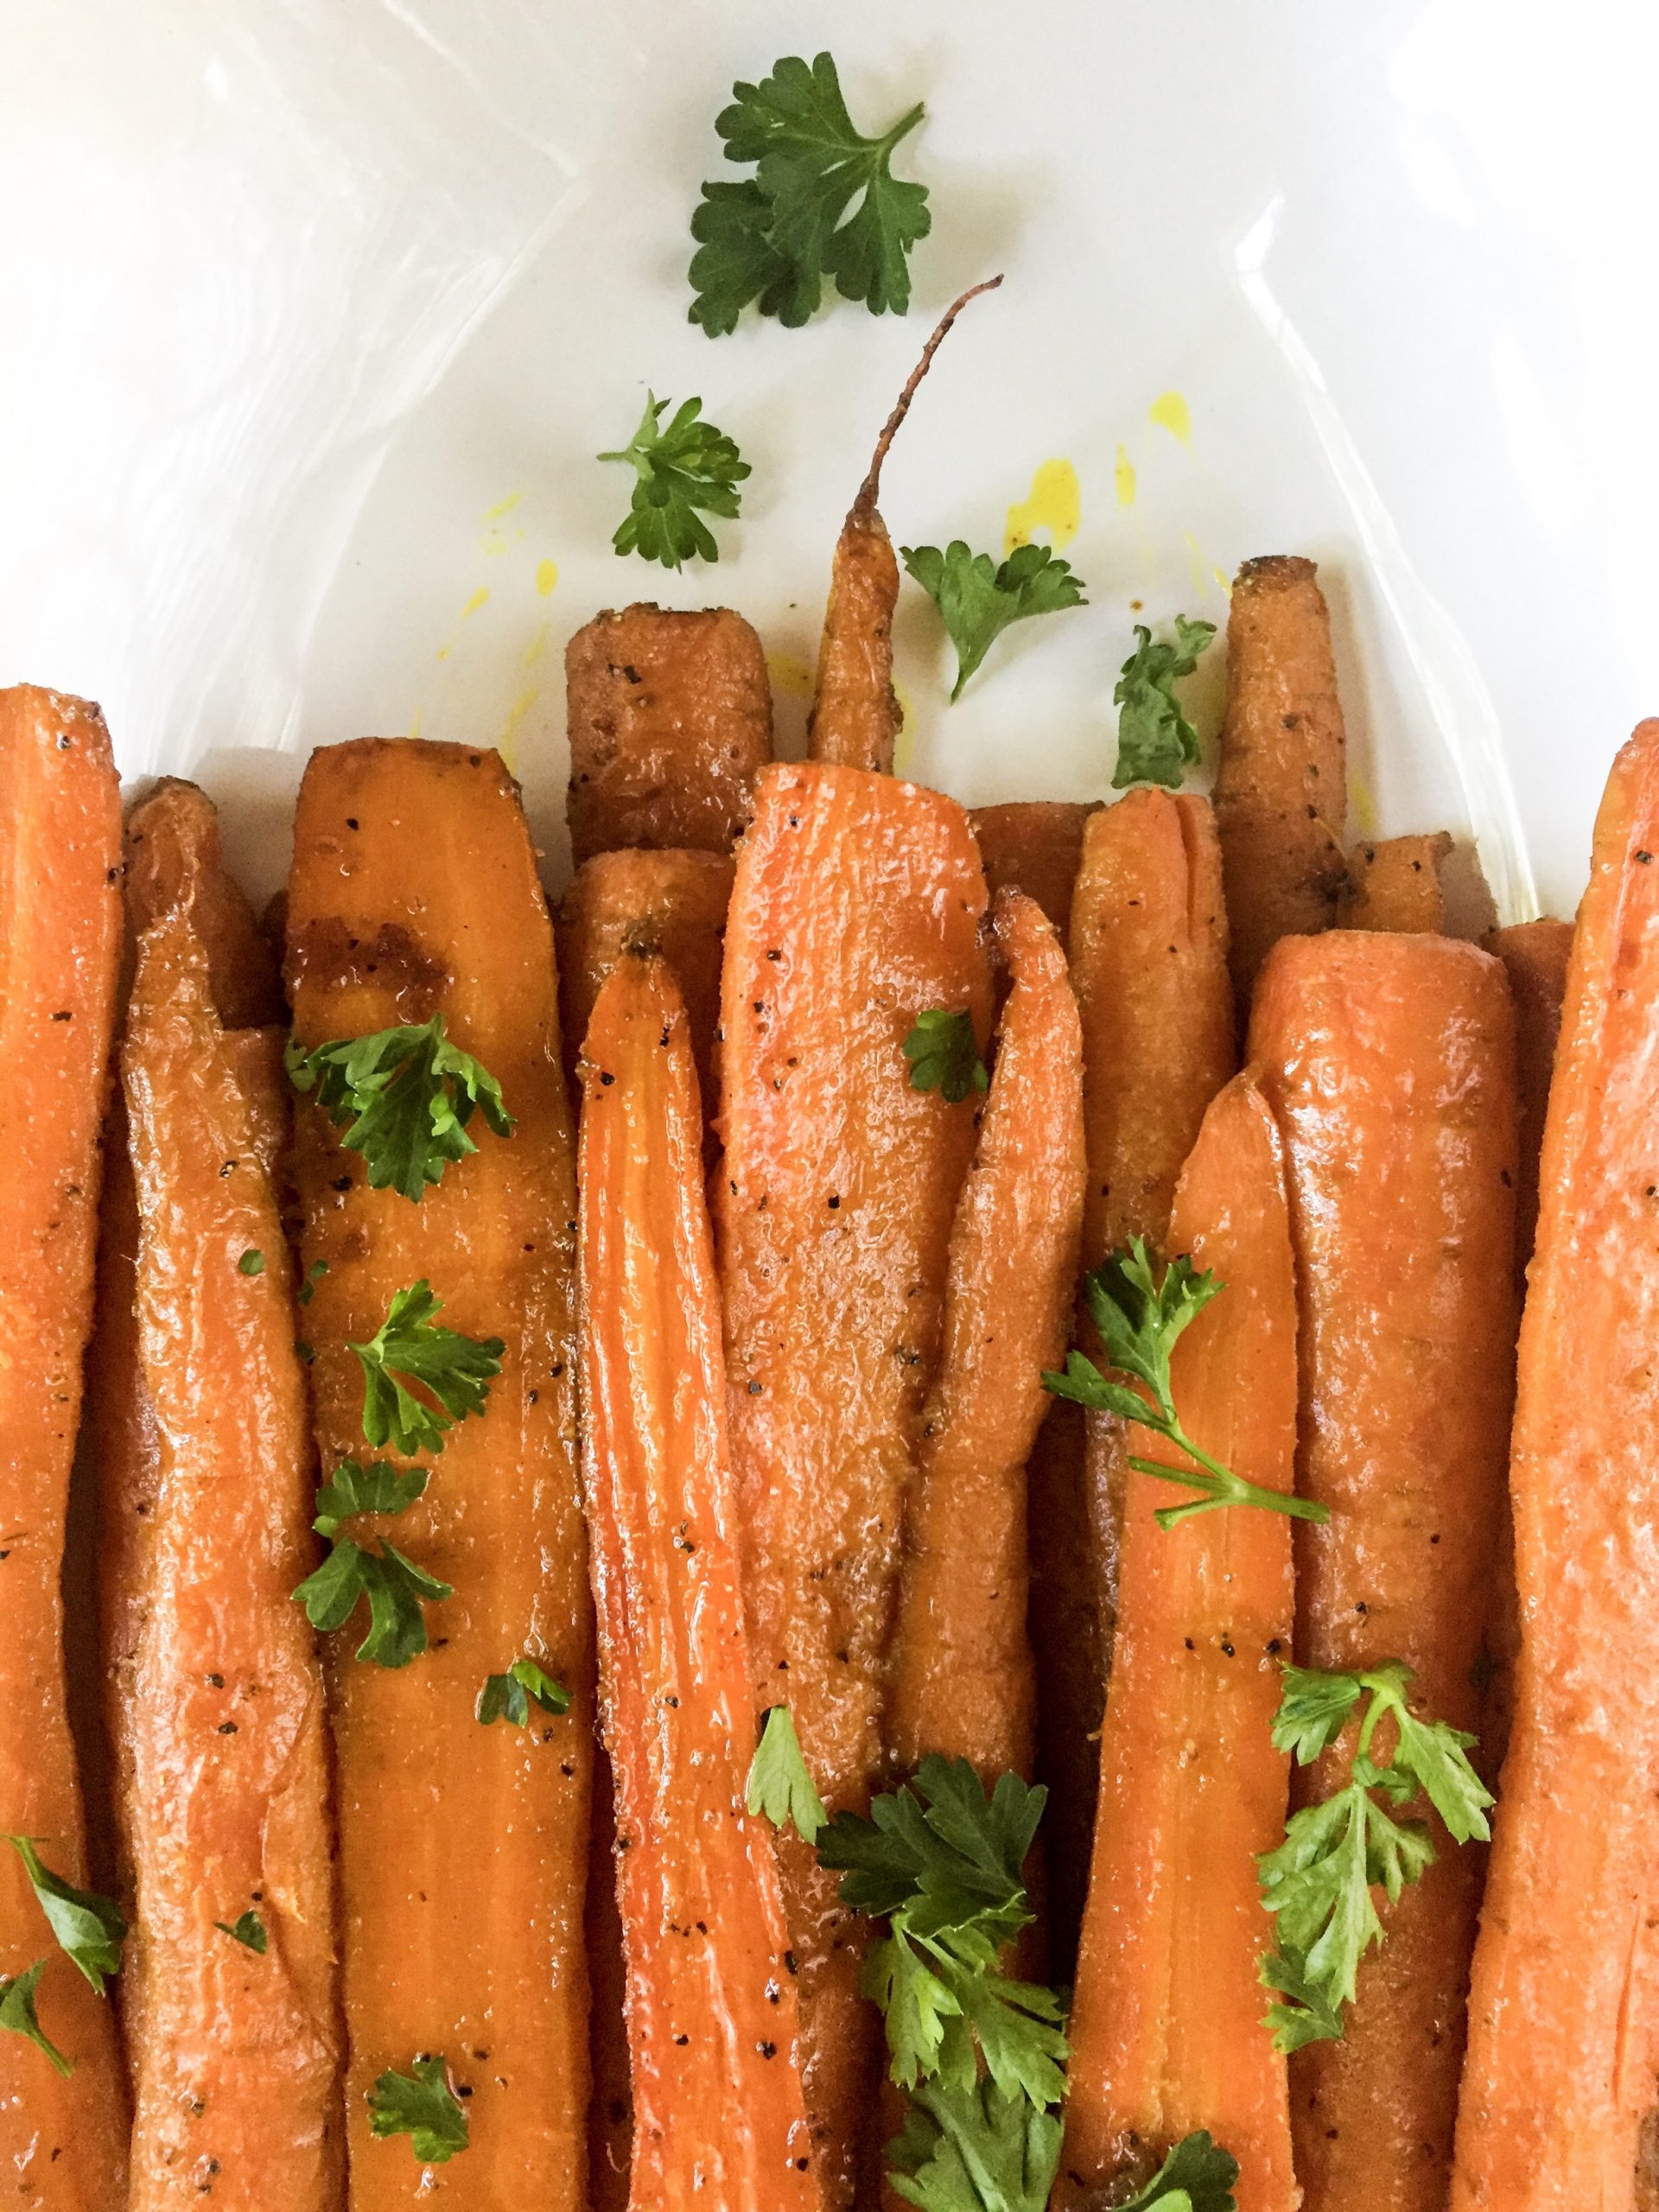 roasted carrots spiced and garnished.